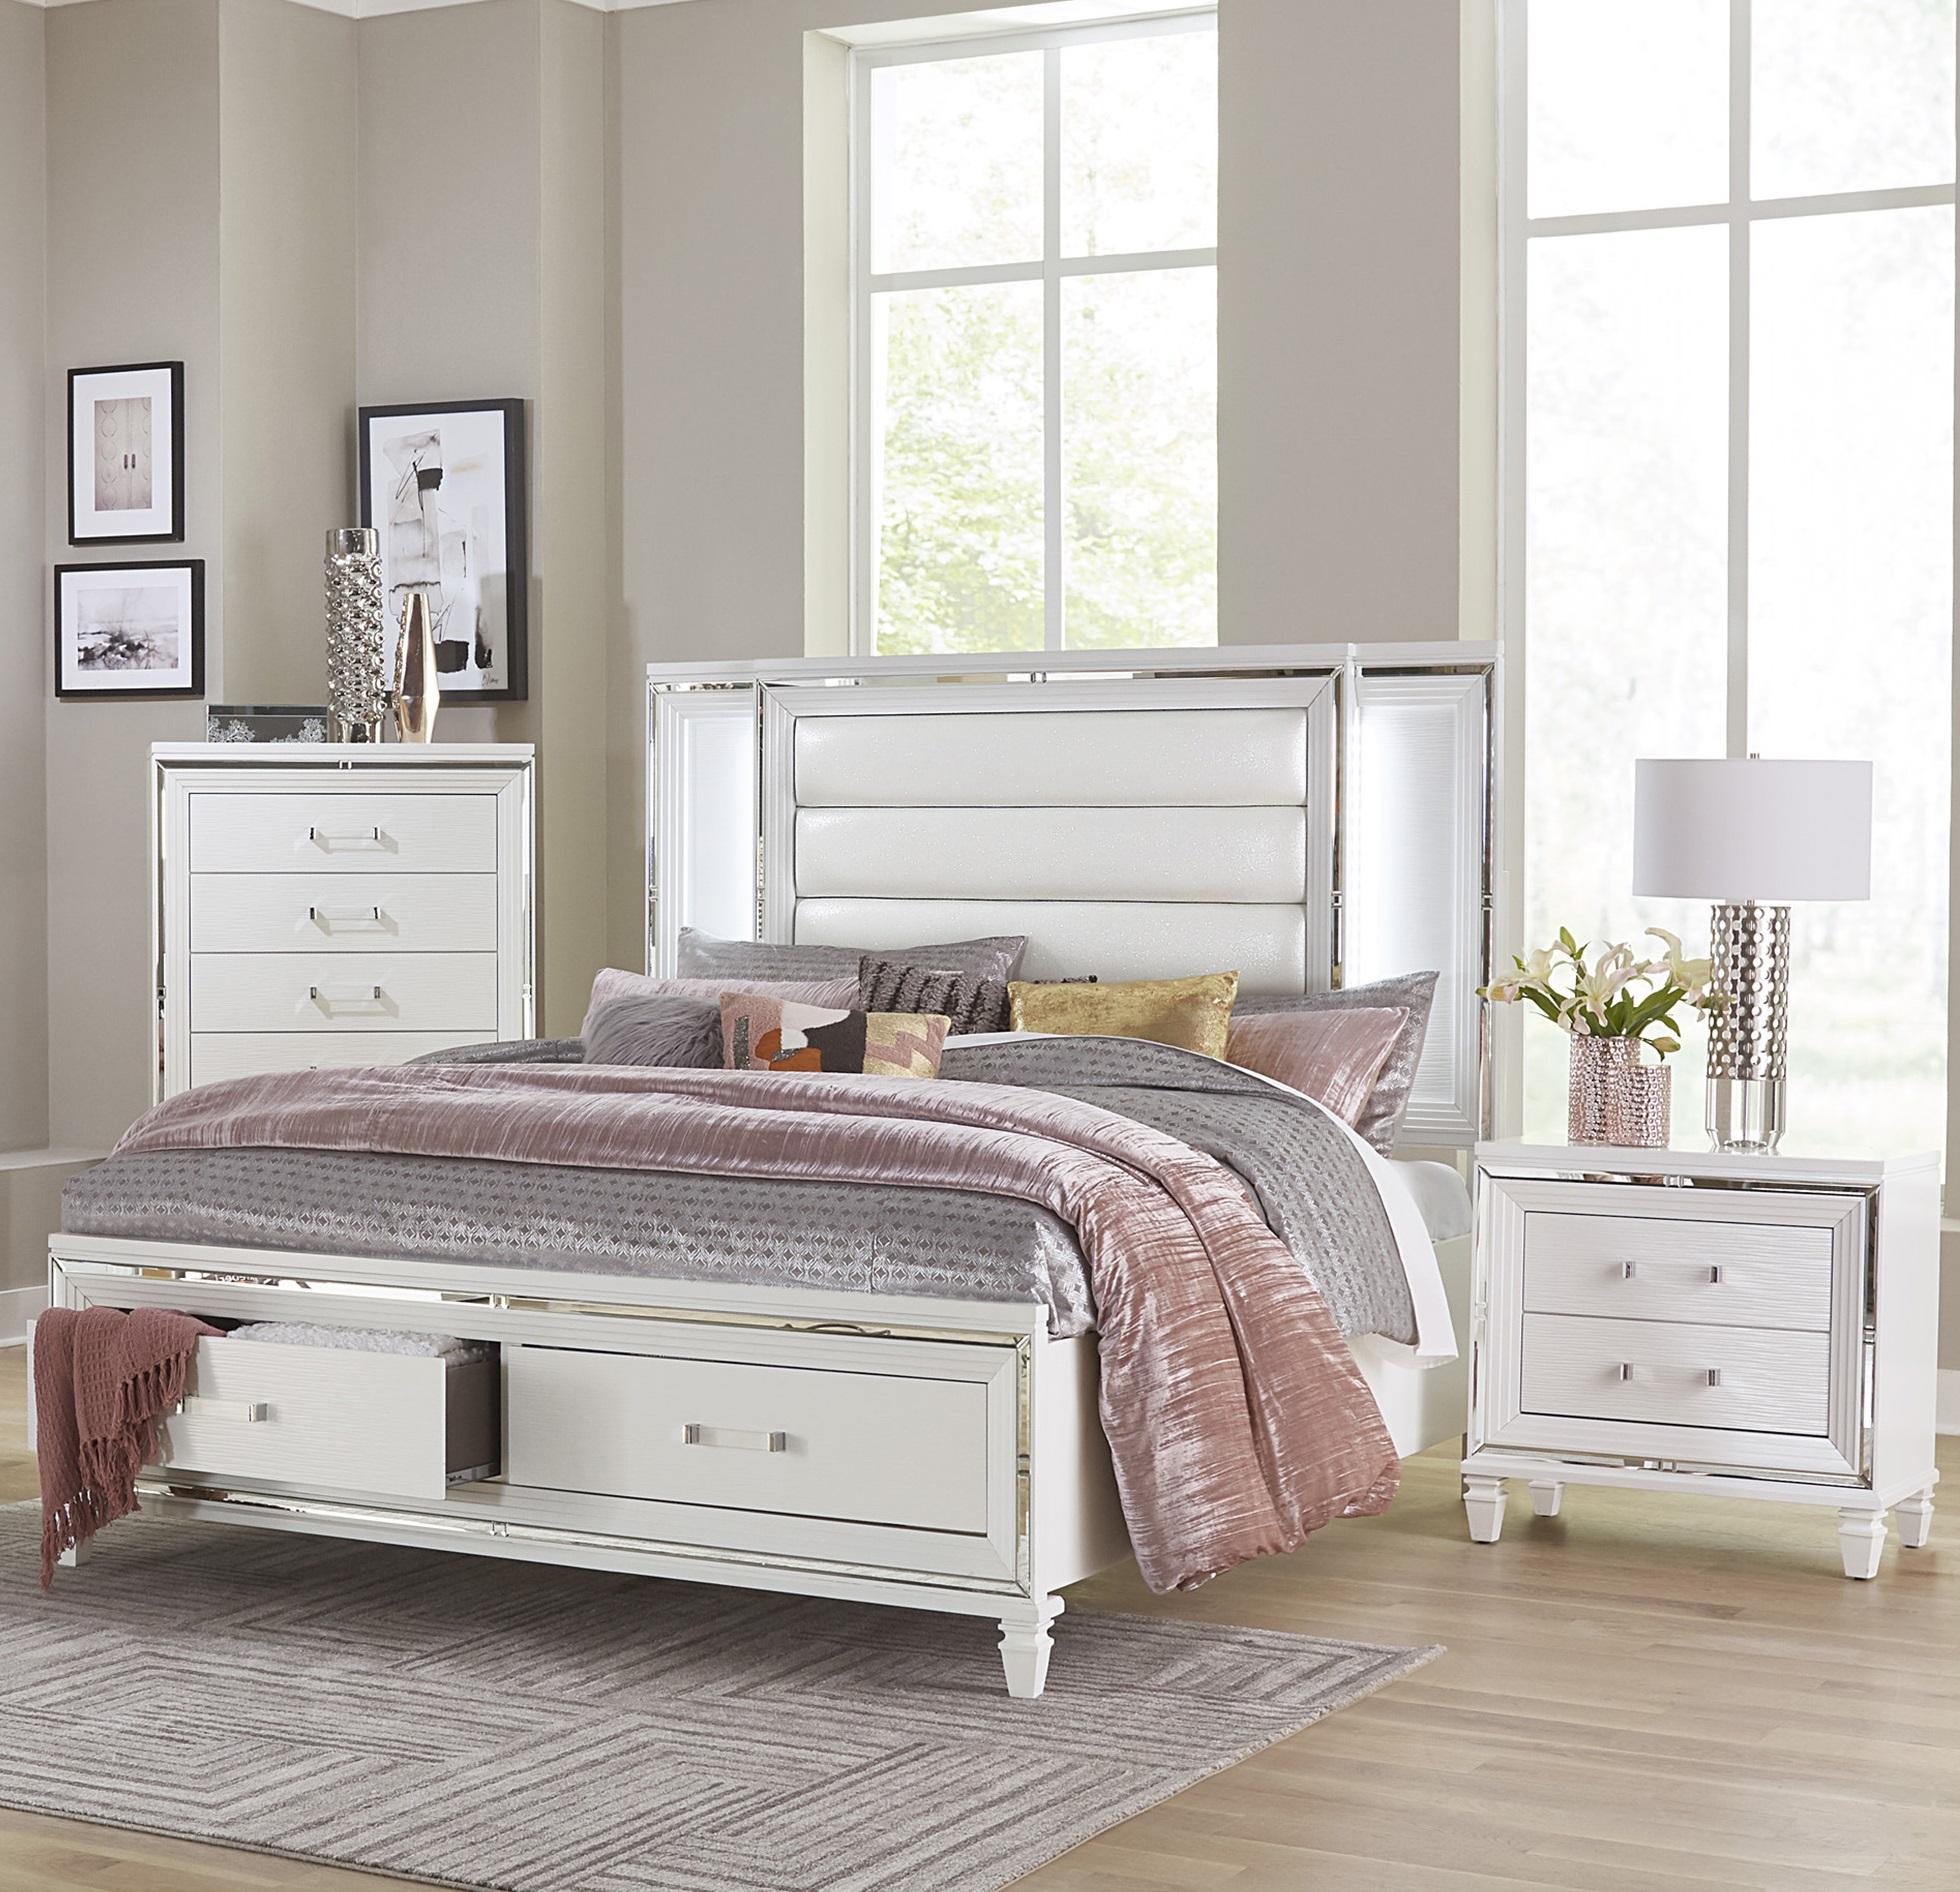 Modern Bedroom Set 1616WK-1CK-3PC Tamsin 1616WK-1CK-3PC in White Faux Leather